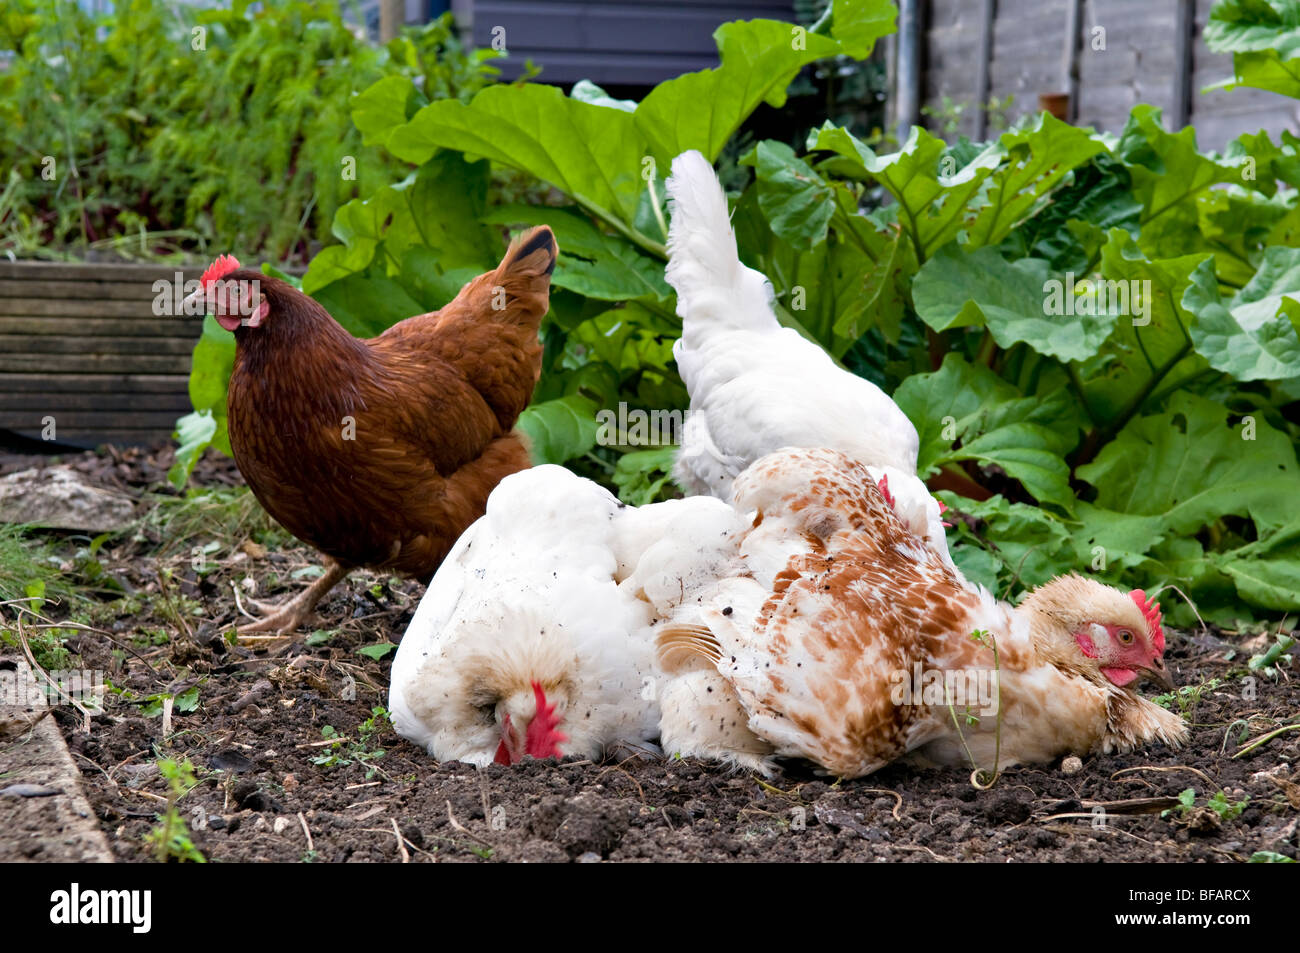 Chickens, type White Star, rhode star and a Brown Amber, in the middle of a dirt bath with rhubarb plants behind them. Stock Photo